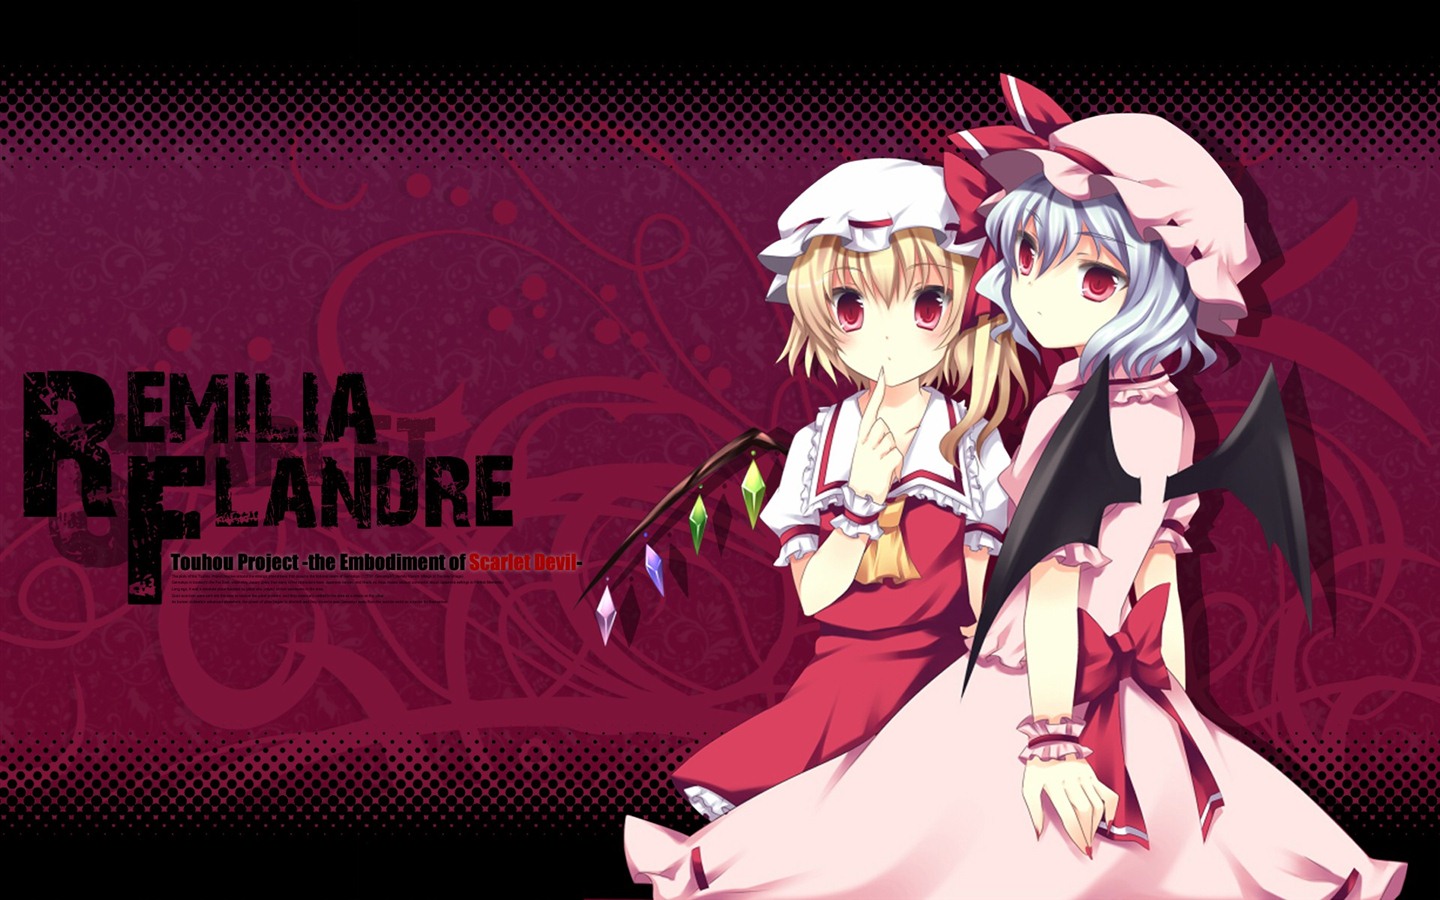 Touhou Project caricature HD wallpapers #8 - 1440x900